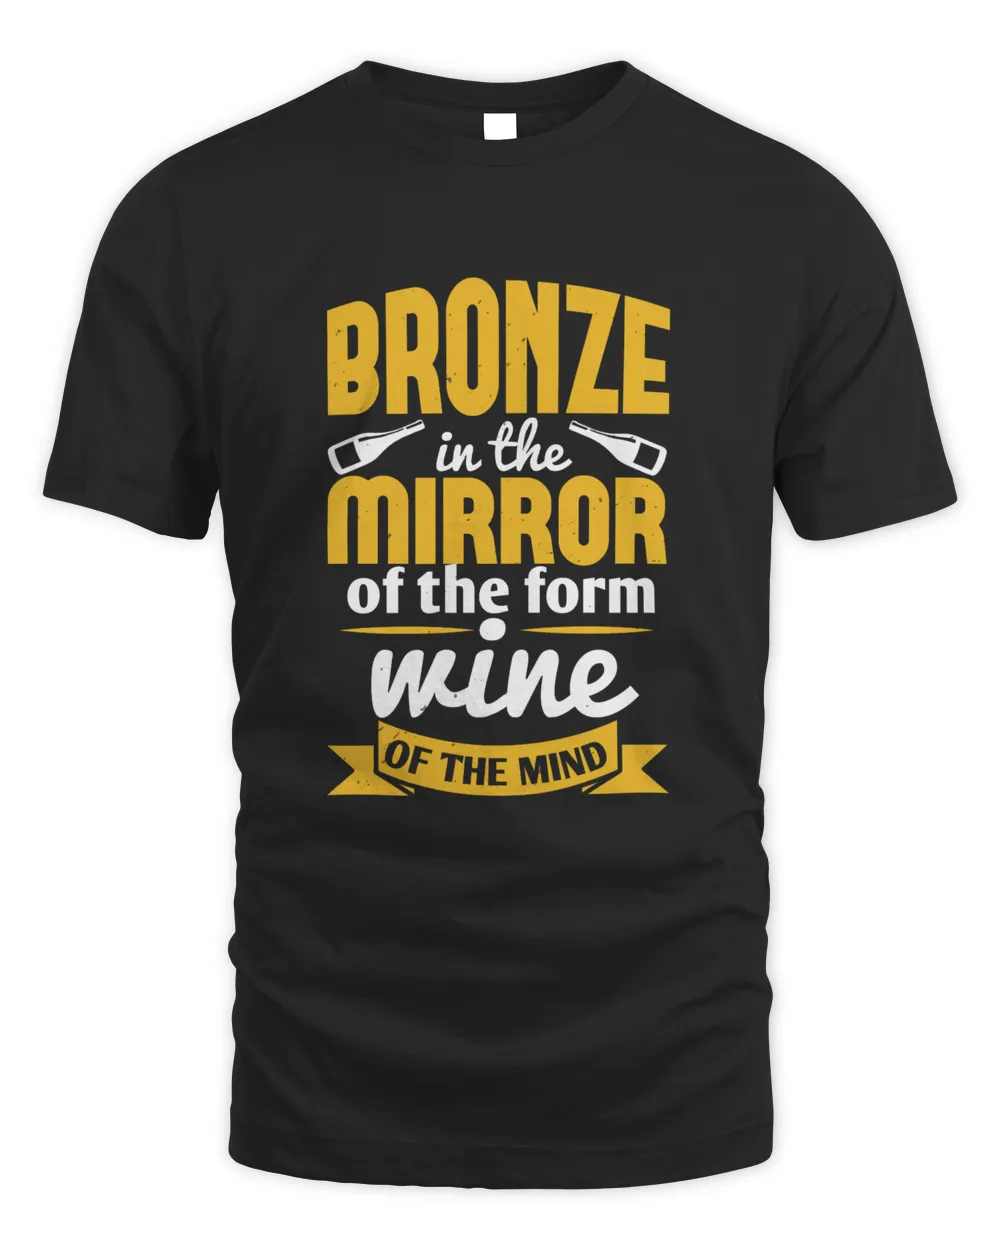 Bronze in the mirror of the form, wine of the mind